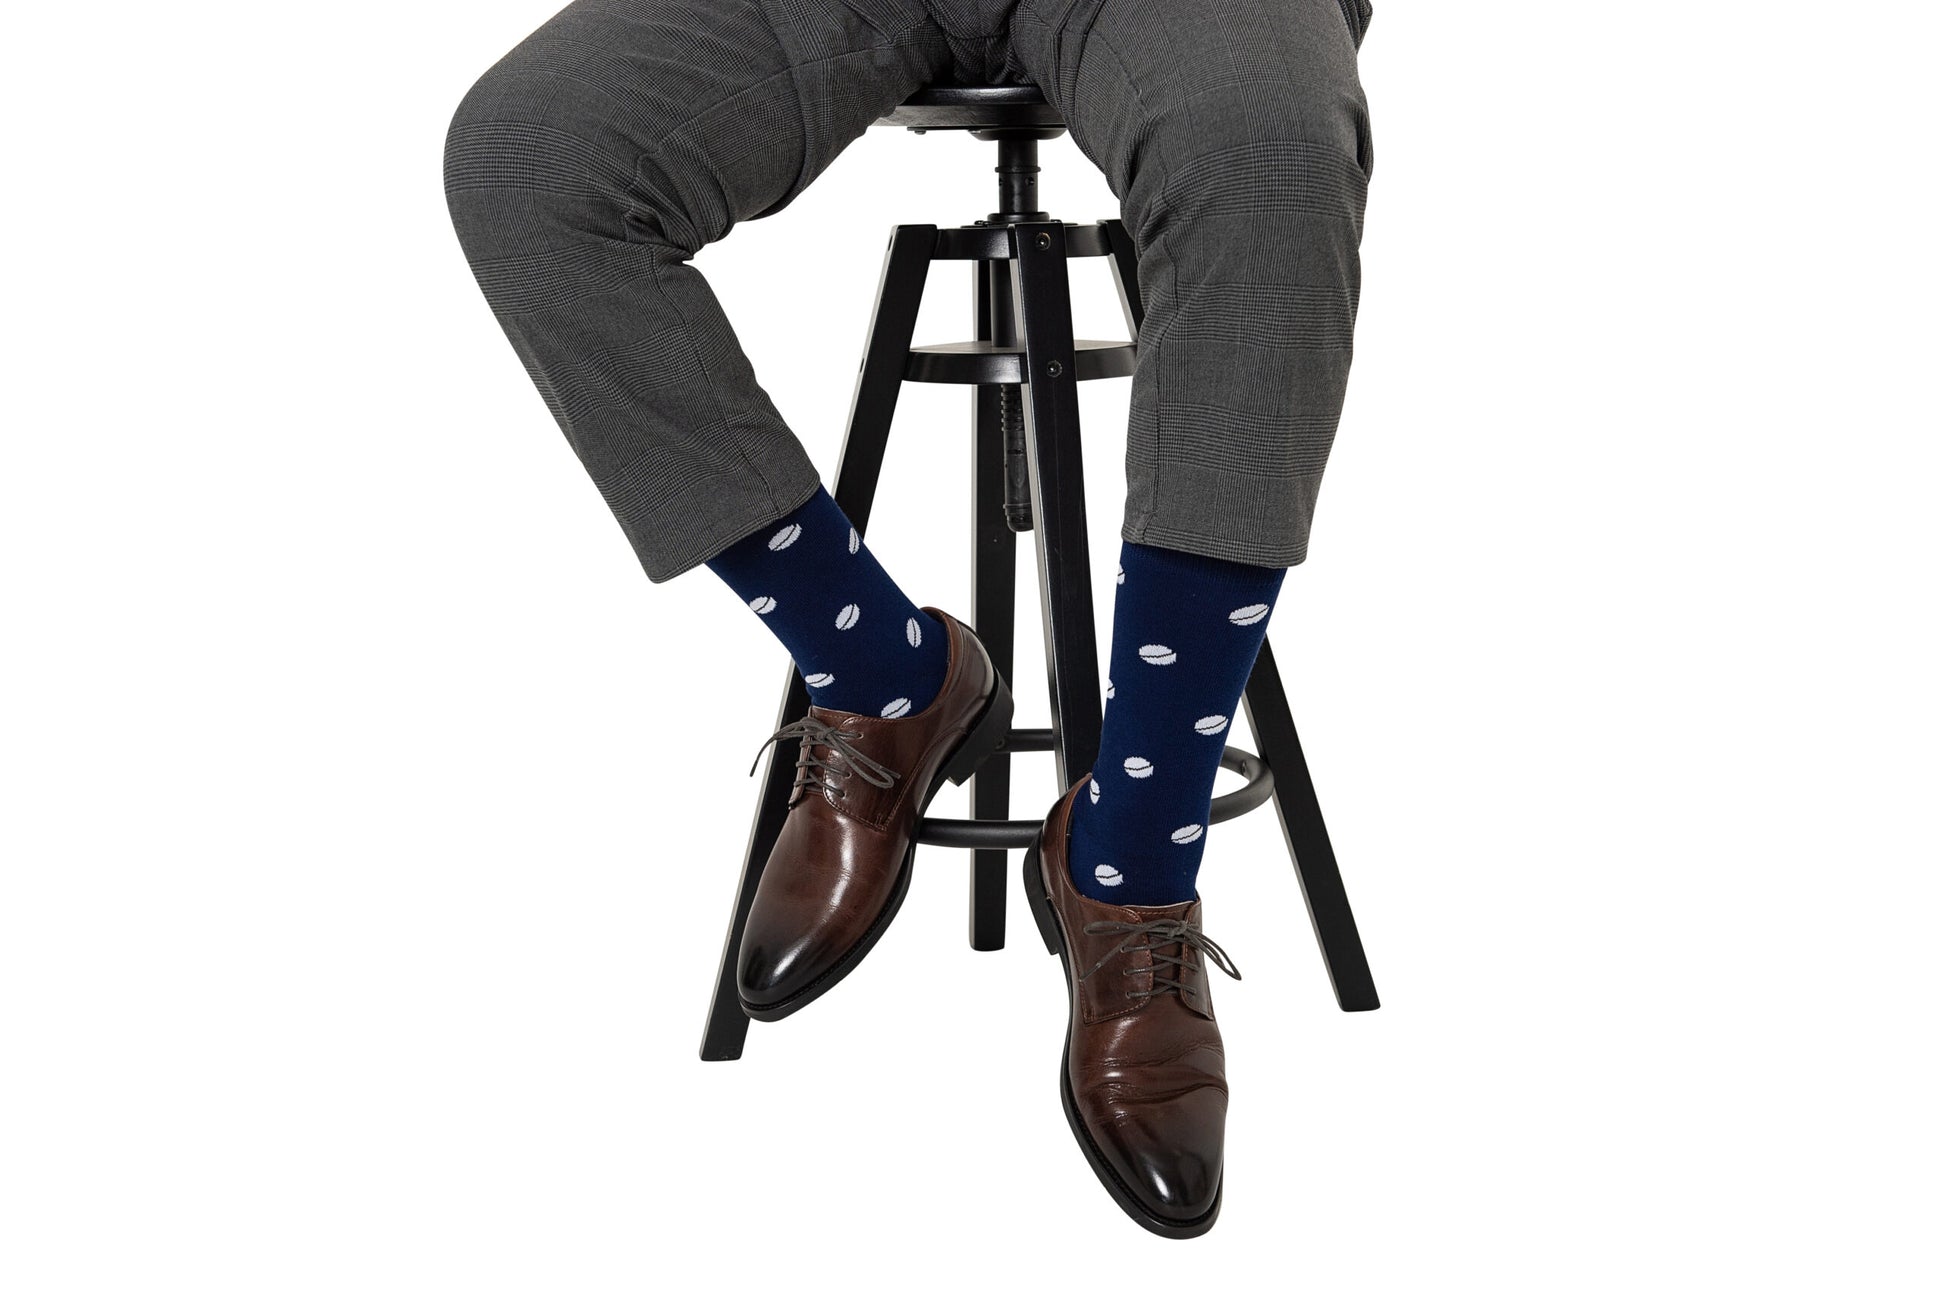 A person seated on a black stool, wearing grey trousers and brown leather shoes paired with Rugby Socks adorned with white polka dots, ready to tackle the day.